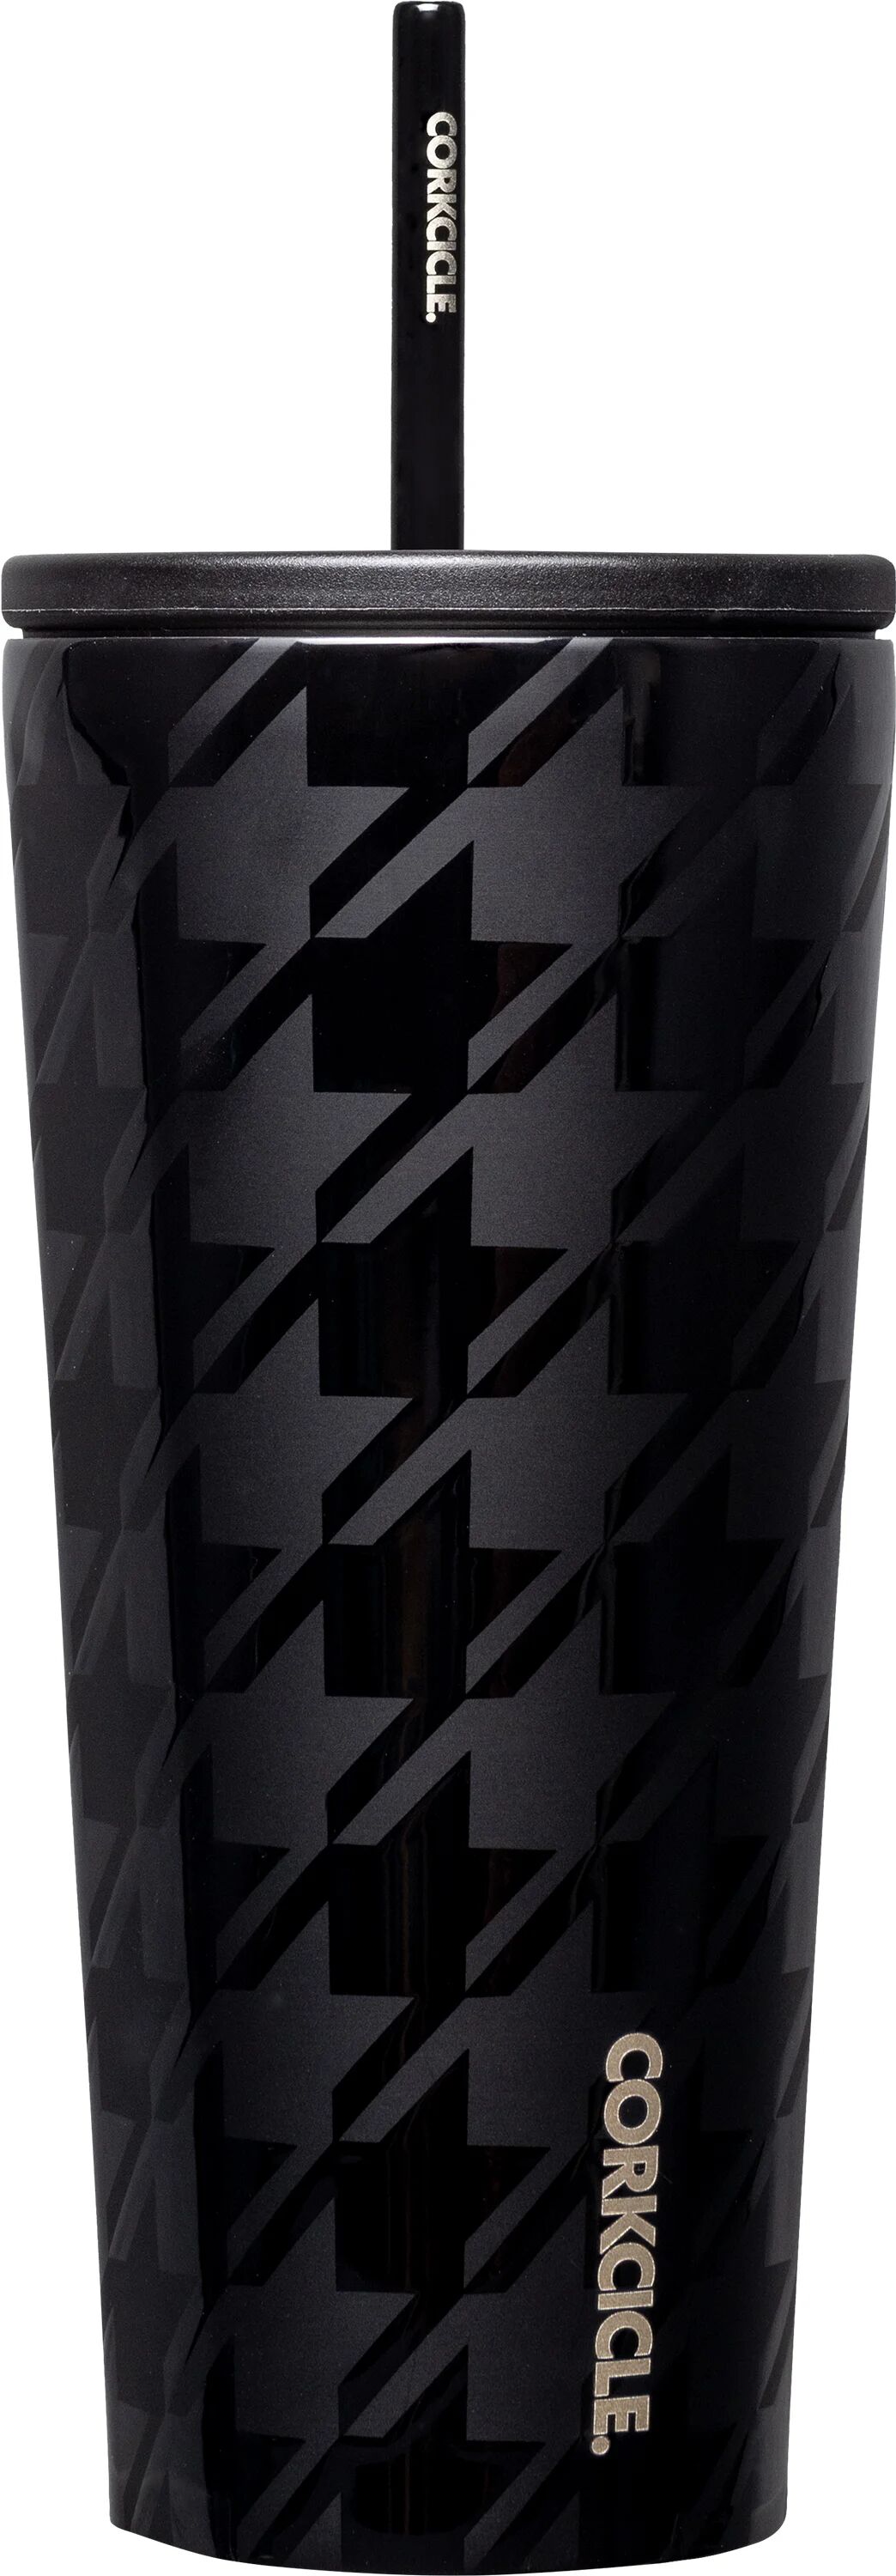 Corkcicle Cold Cup Insulated Tumbler With Straw